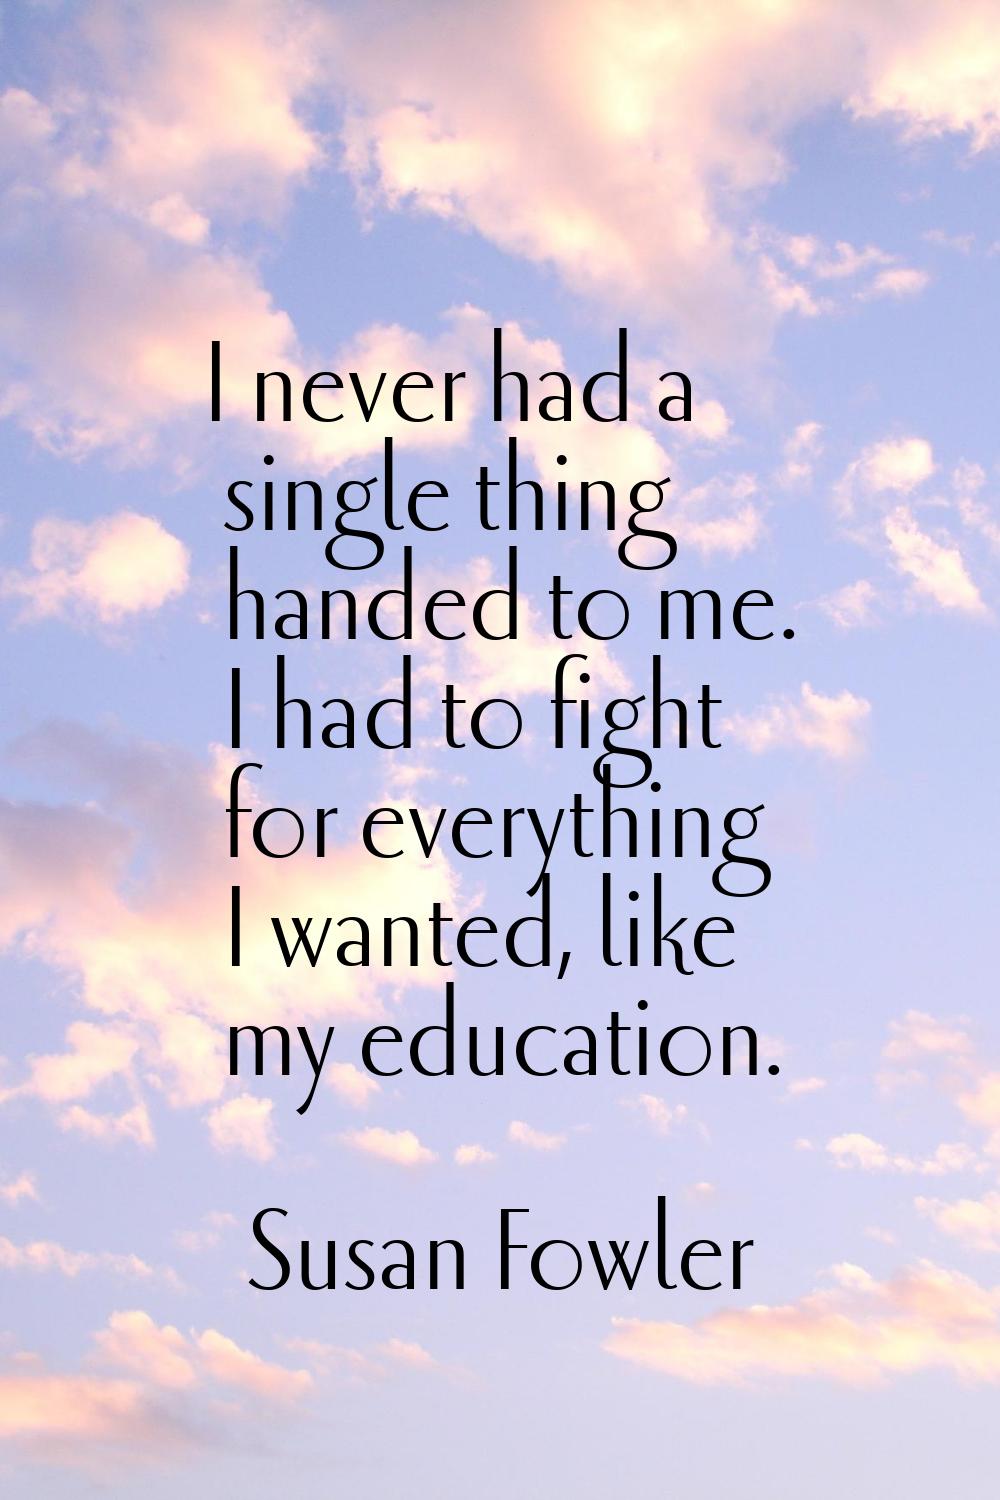 I never had a single thing handed to me. I had to fight for everything I wanted, like my education.